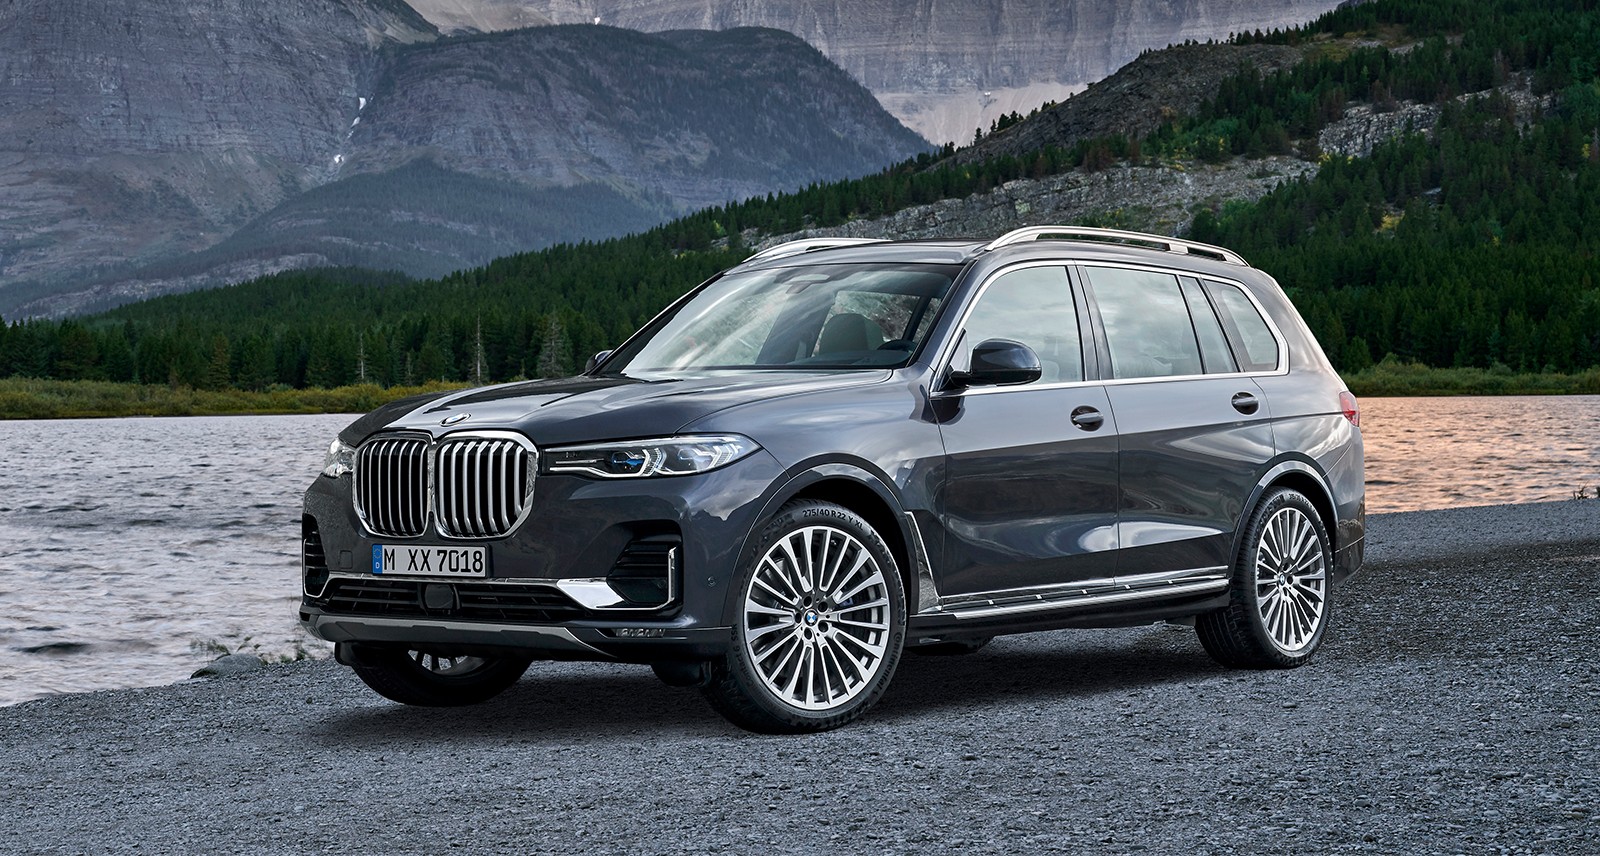 The 2019 BMW X7 Is Here and It Is Gigantic